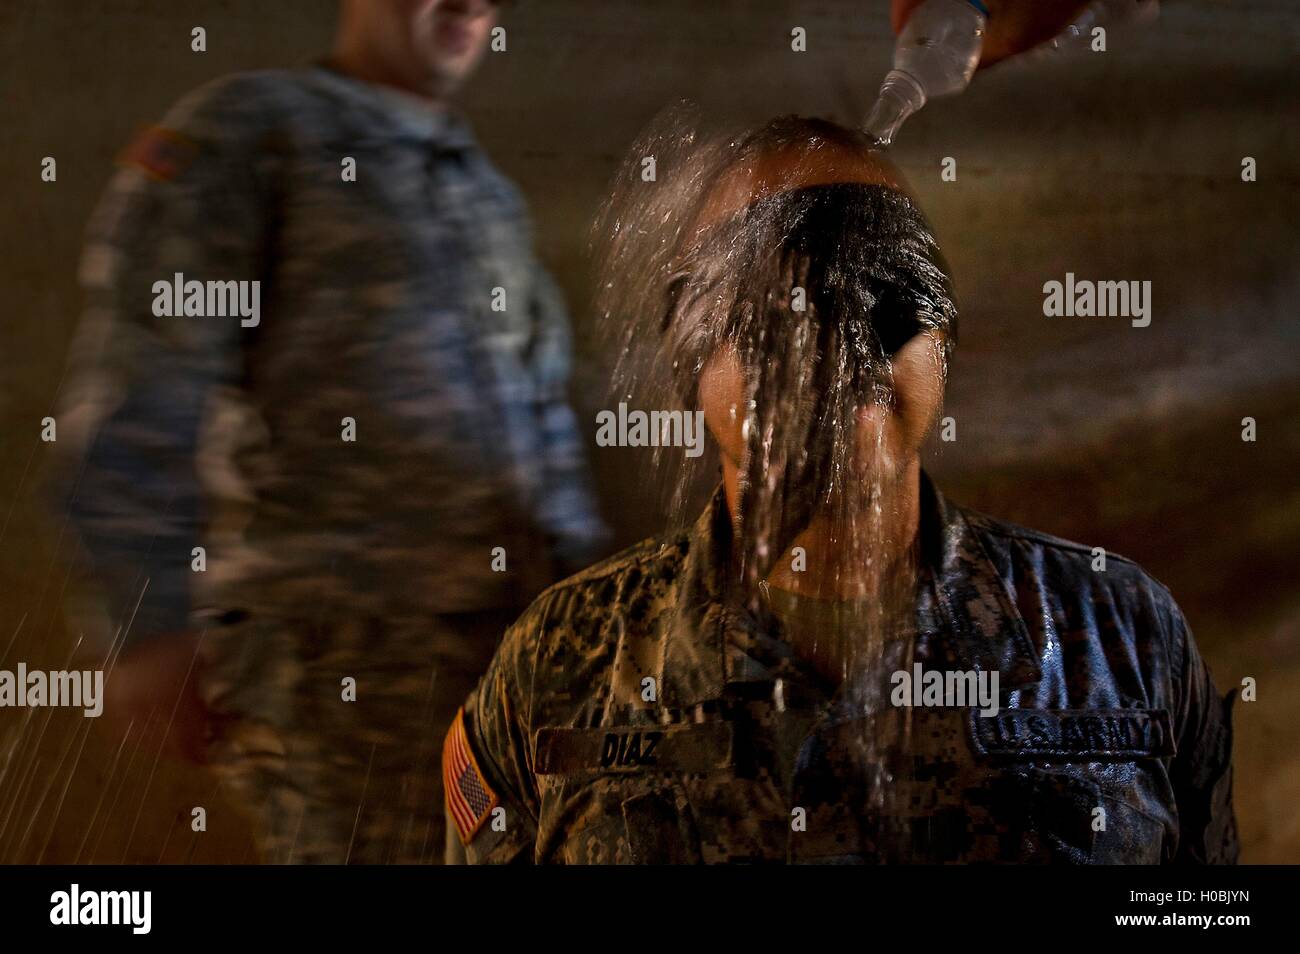 U.S. Army combat medic Fernando Diaz is blindfolded during a mock water torture interrogation at the 2012 Pacific Regional Medical Command Best Medic Competition at Schofield Barracks August 30, 2012 in Wahiawa, Hawaii. Stock Photo